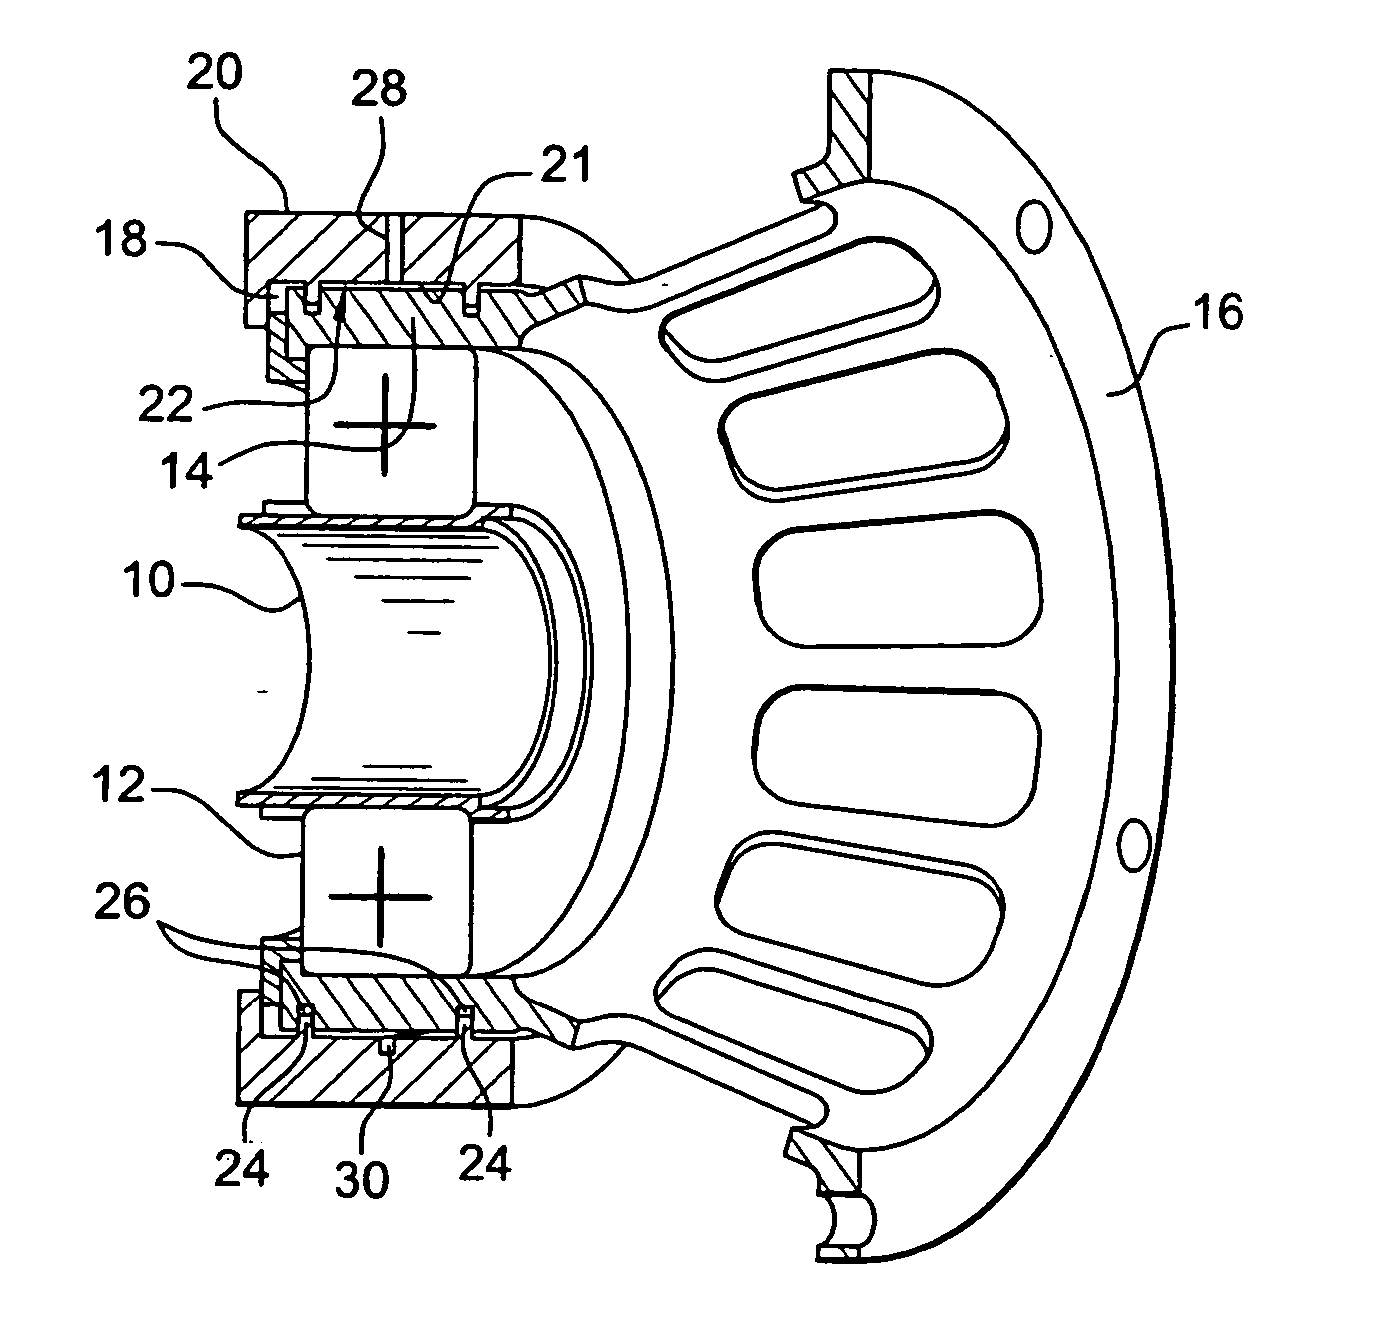 Device for supporting and guiding a rotating shaft